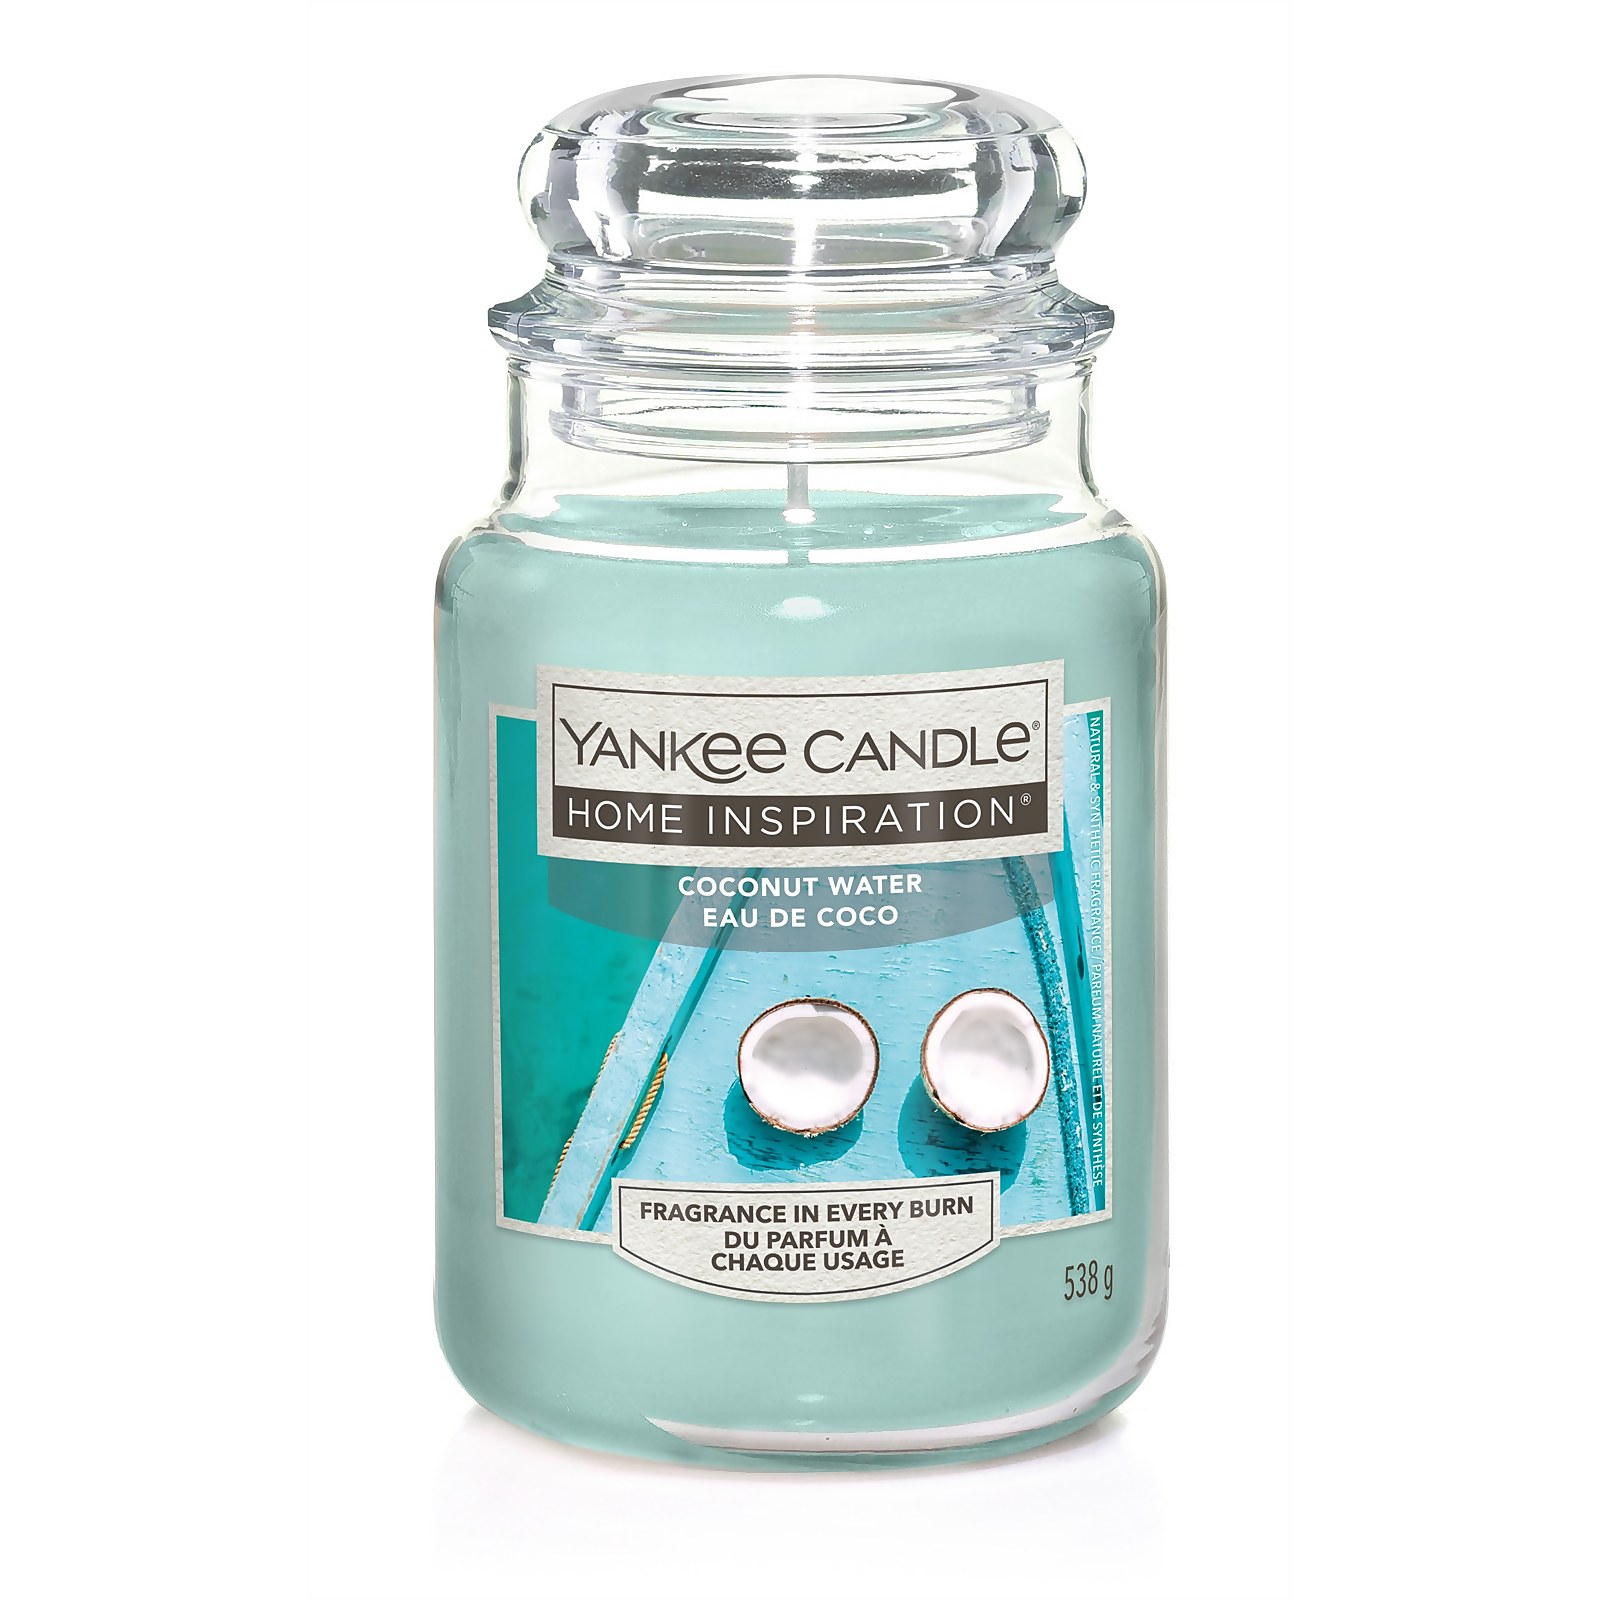 Photo of Yankee Candle Home Inspiration Scented Candle - Large Jar - Coconut Water